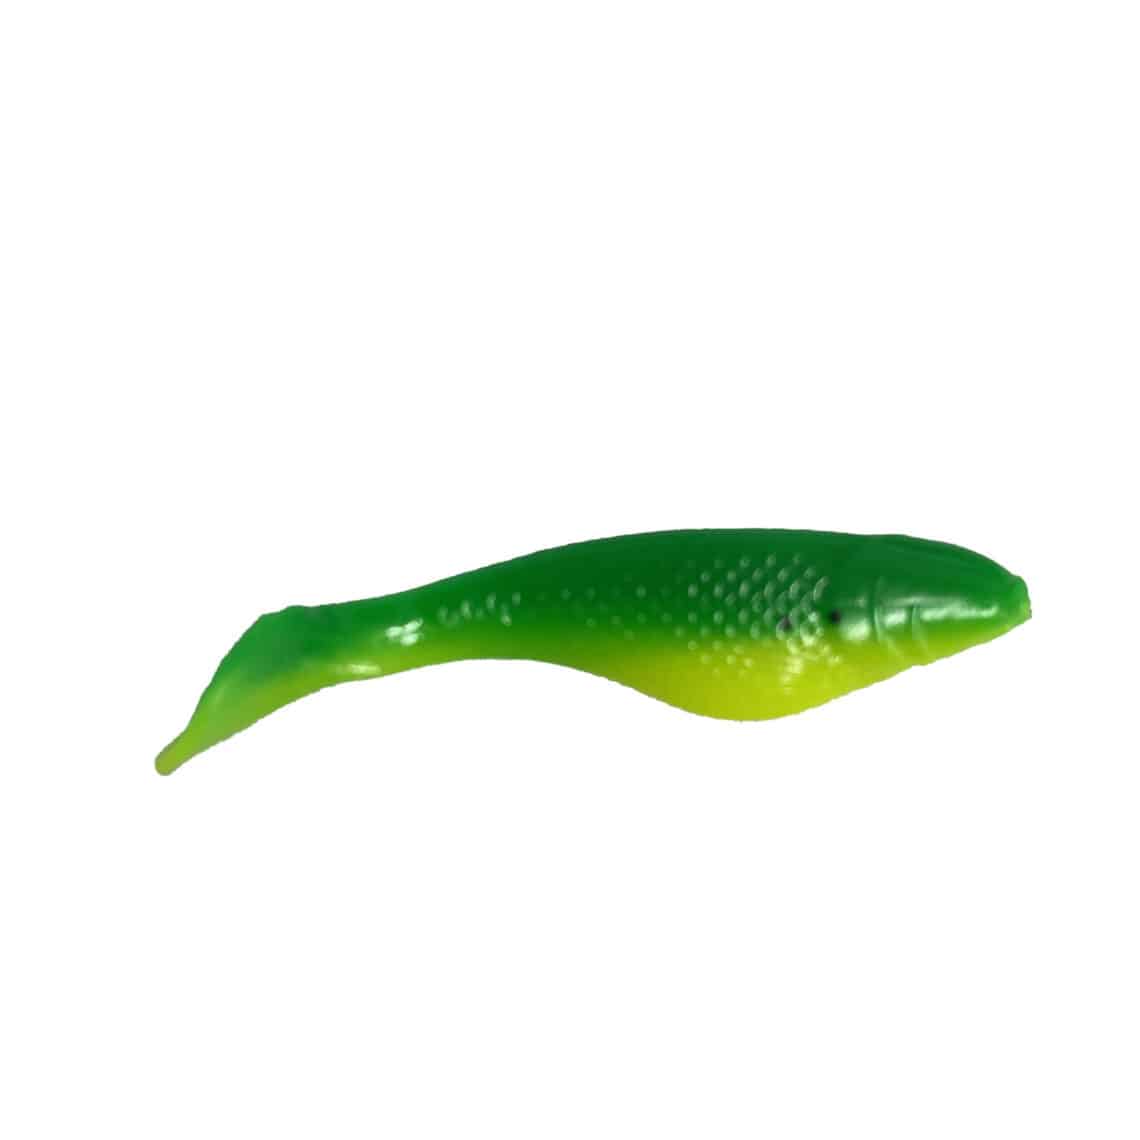 CLOSEOUT * APEX TACKLE 1IN SHAD SOFT BAIT (ONLINE ONLY